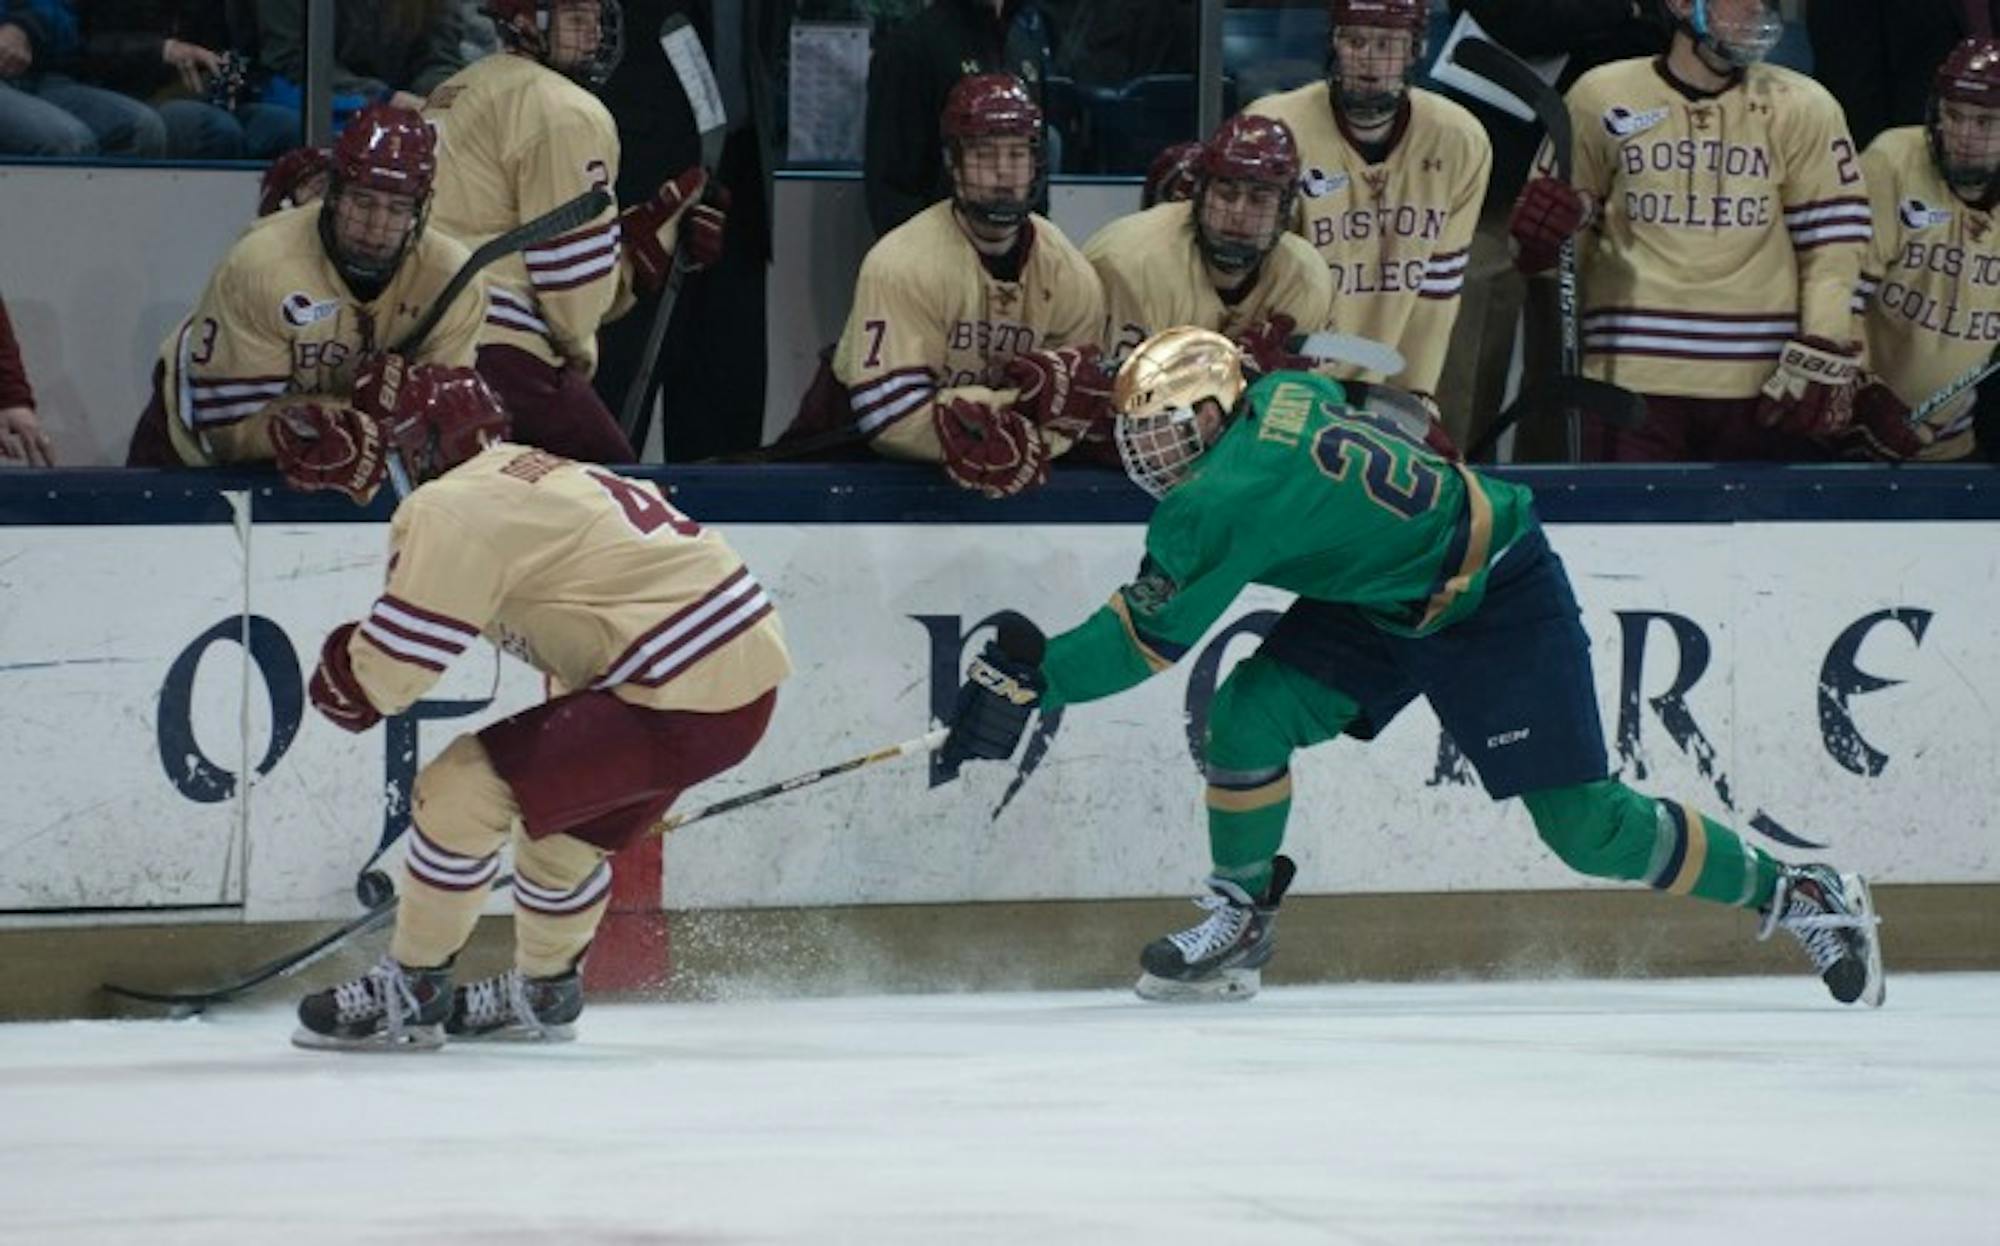 Senior center Steven Fogarty fights for a loose puck during a 2-0 loss to Boston College on Feb. 28 at Compton Family Ice Arena. Fogarty tallied nine goals and 12 assists during the 2014-2015 season.